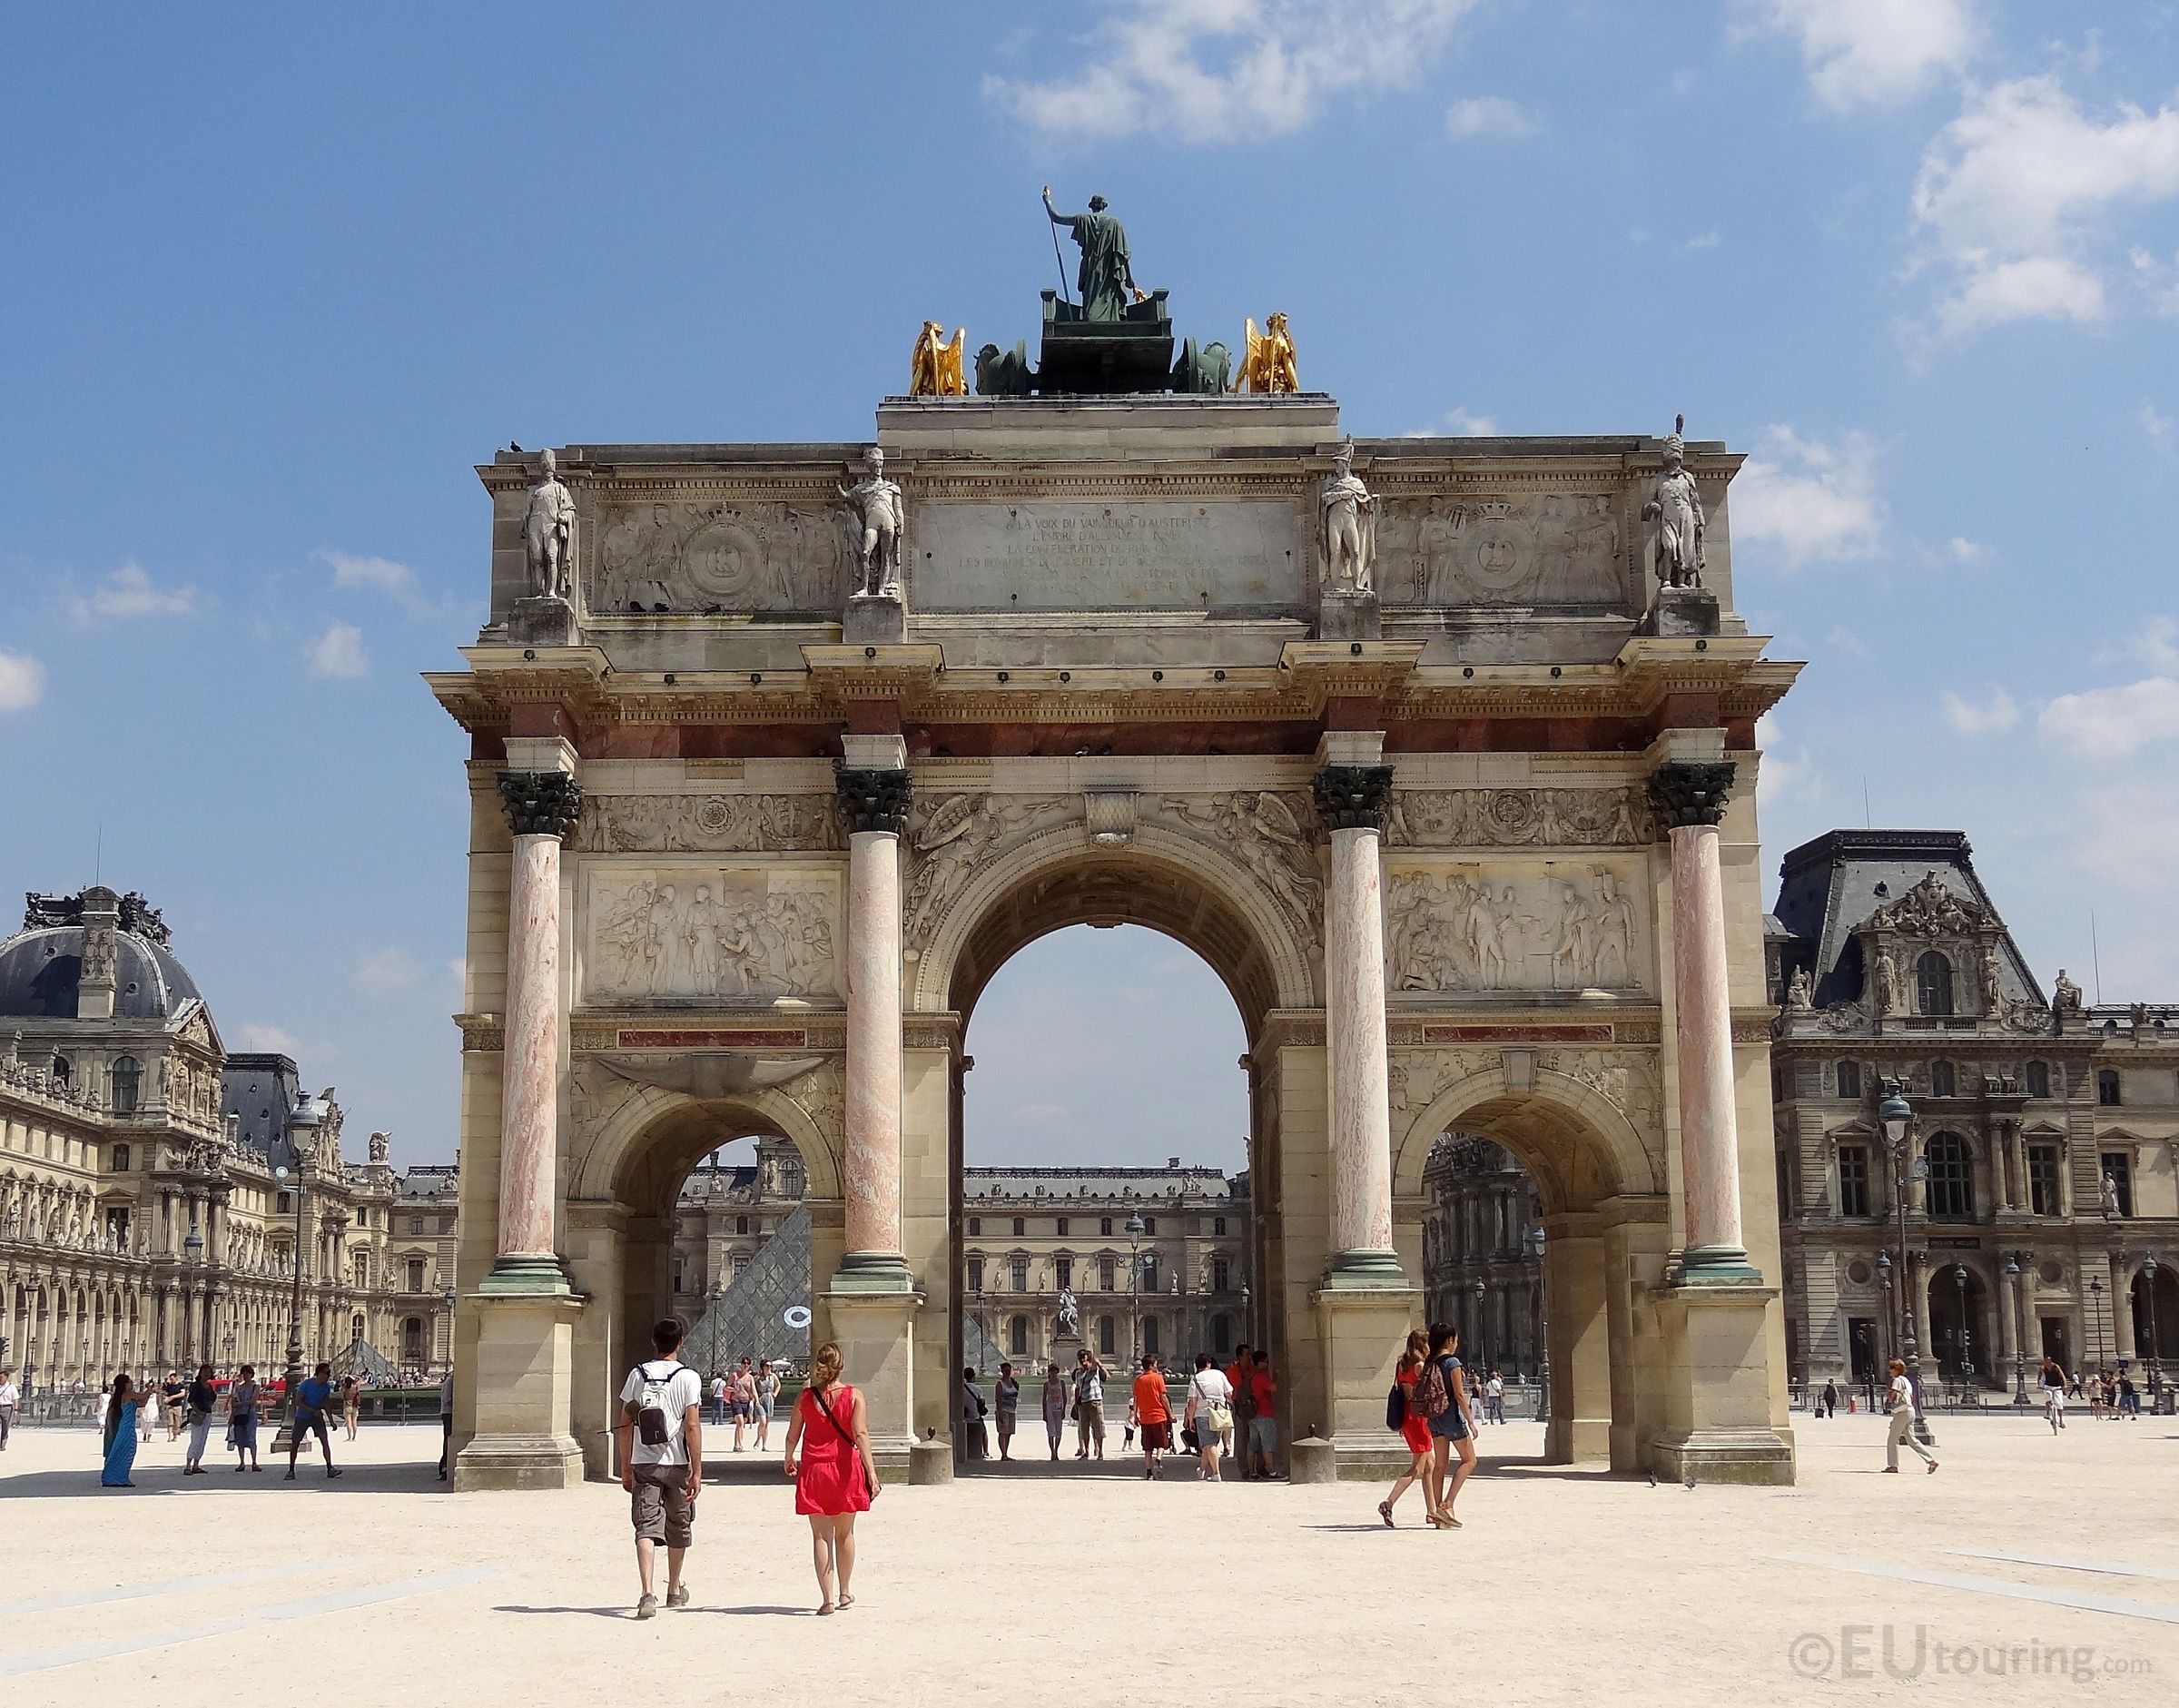 In front of the Louvre this triumphal arch known as the Arc de ...